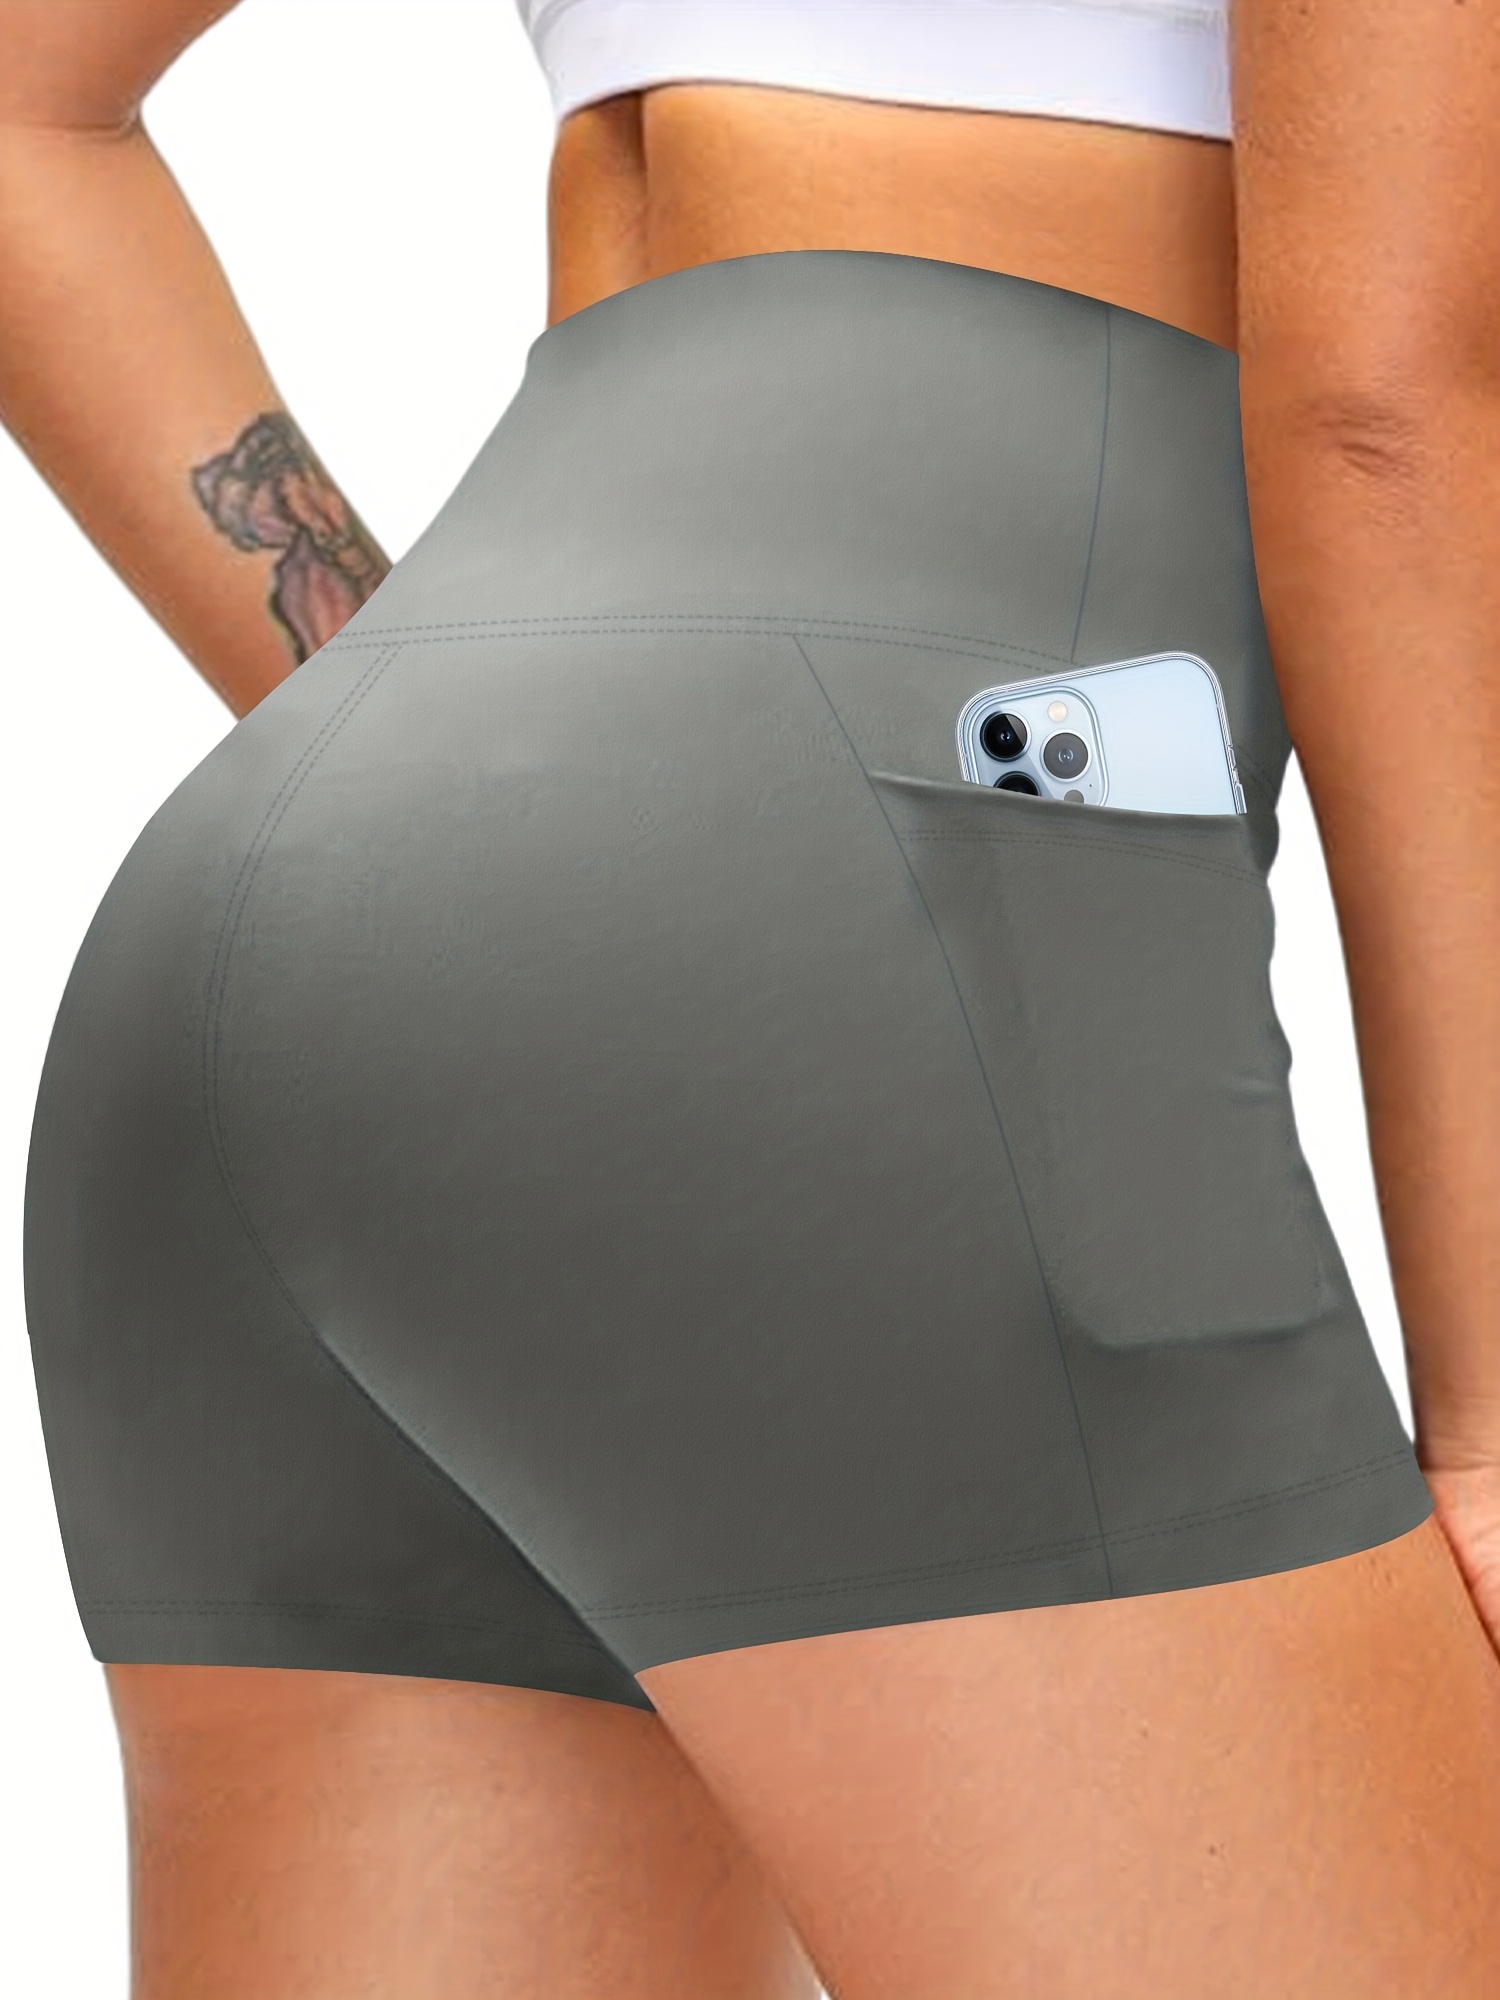 Women's Activewear: Solid Wide Waistband Sports Yoga Shorts With Pockets -  Perfect for Summer Biking!